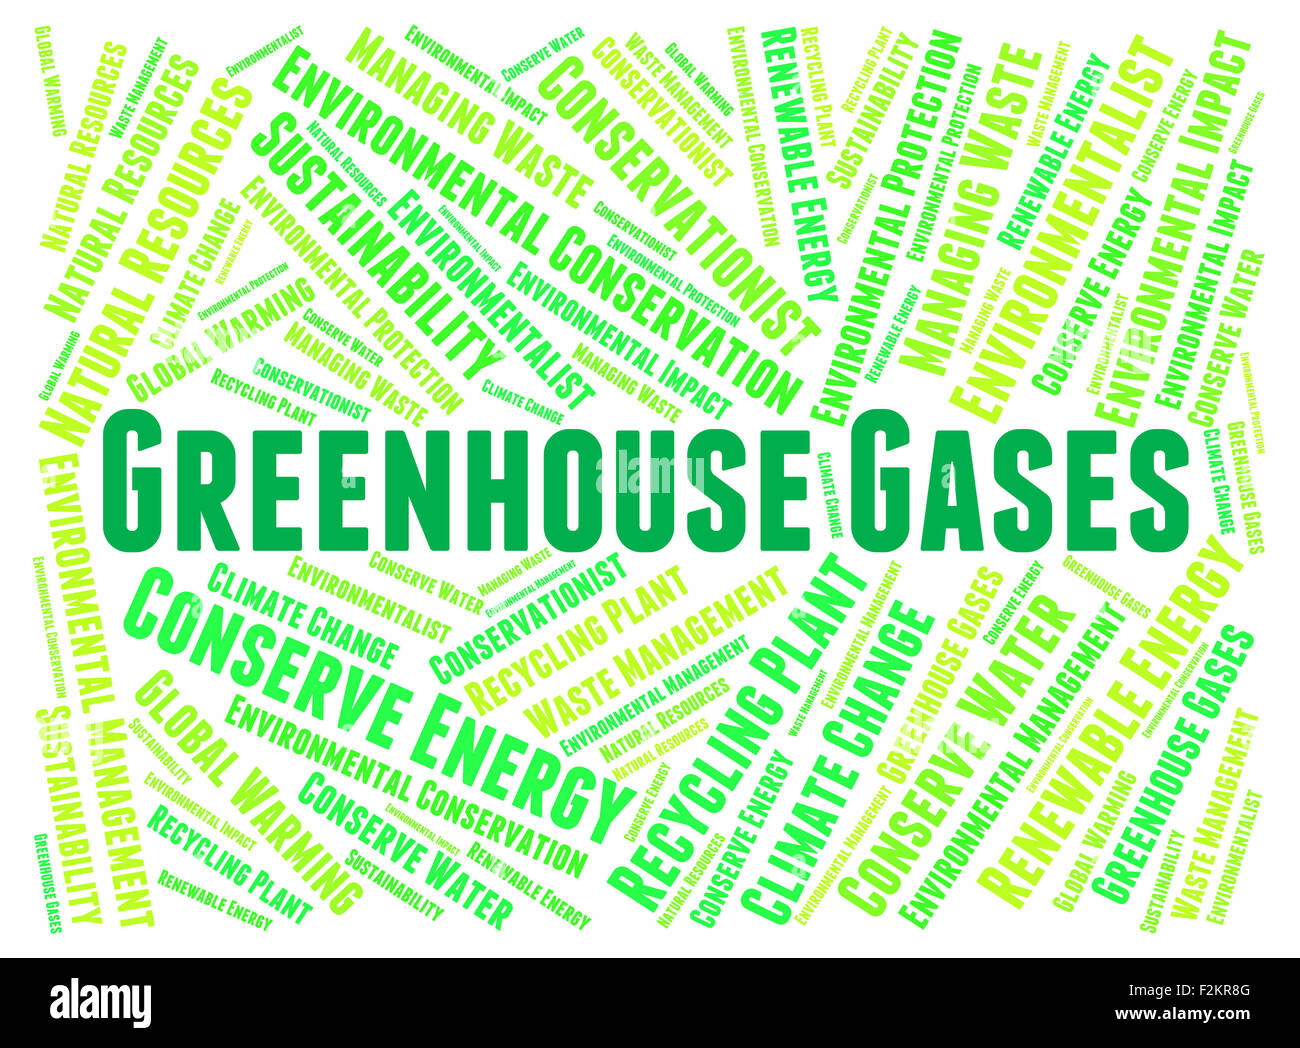 Greenhouse Gases Meaning Carbon Dioxide And Words Stock Photo